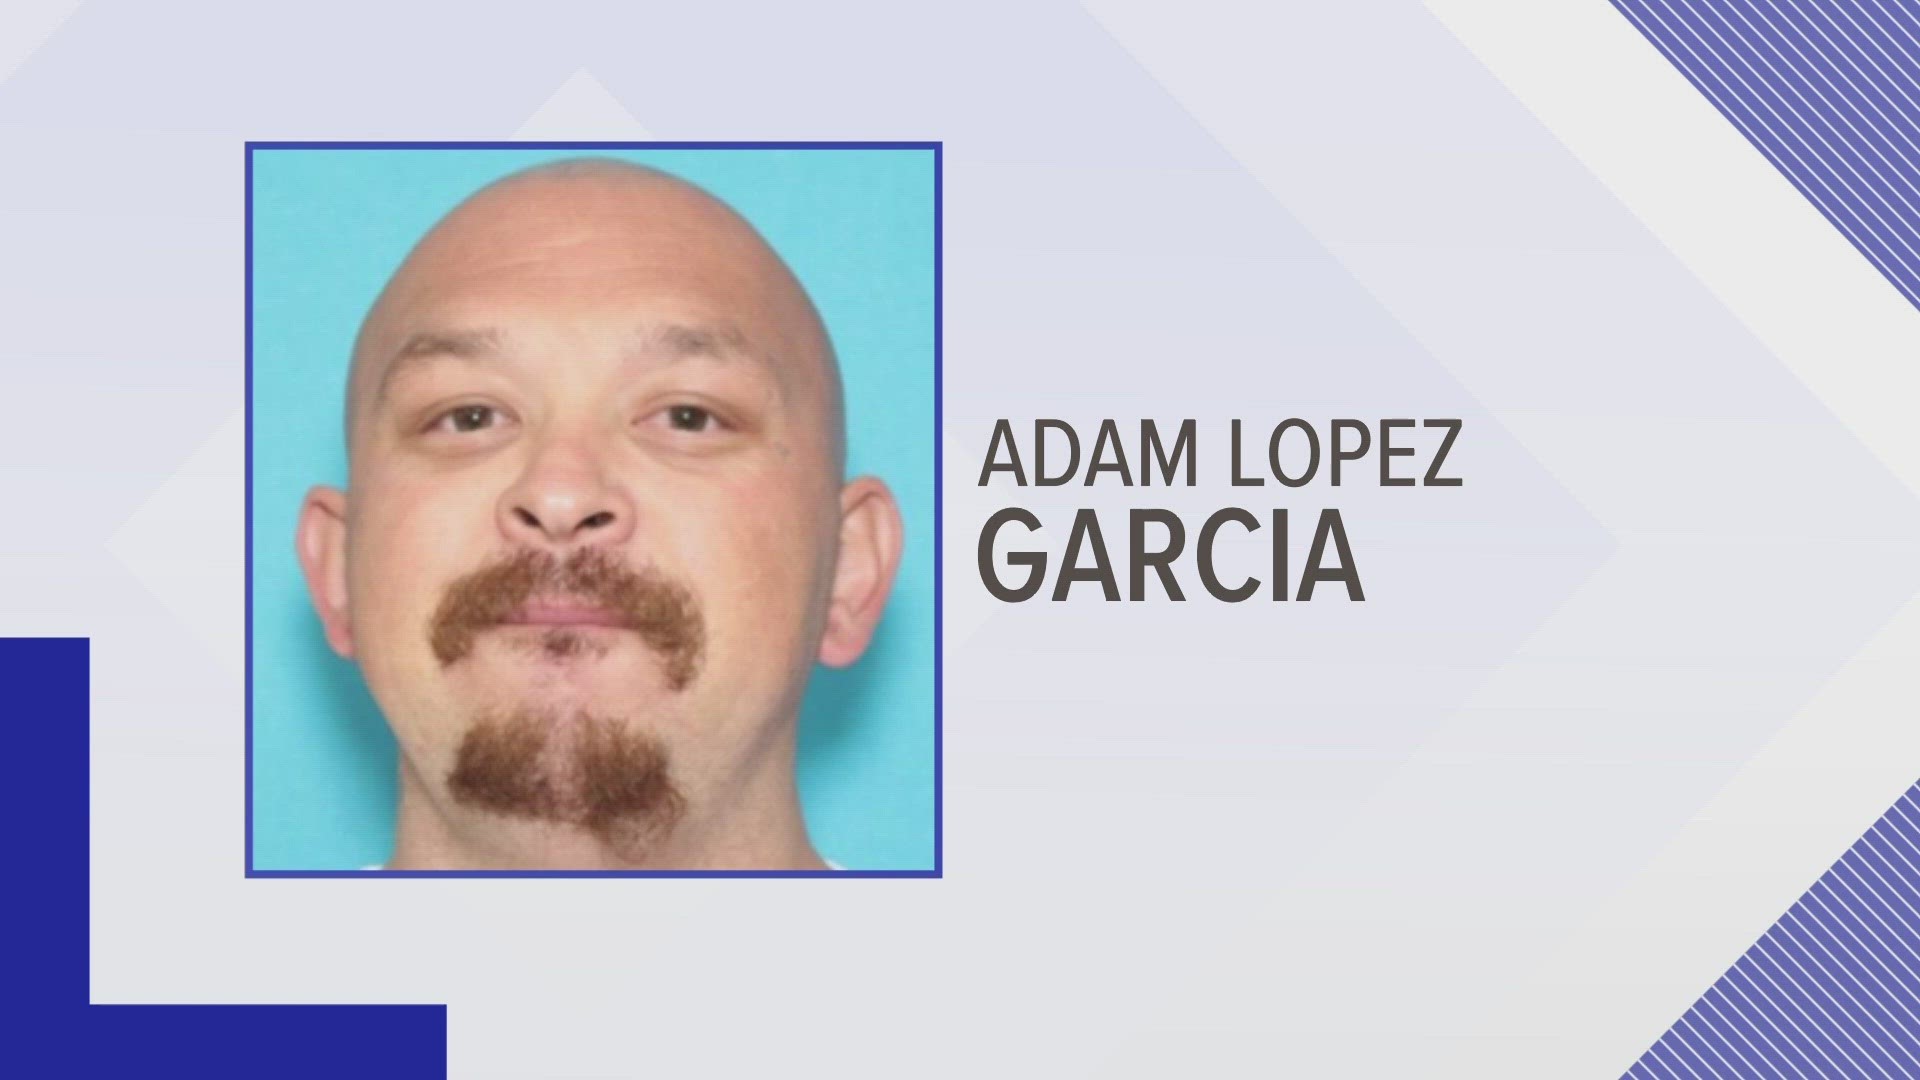 36-year-old Adam Lopez Garcia is wanted for first degree murder and aggravated assault, PPD says. Anyone with any information about Garcia should call 432-445-4911.